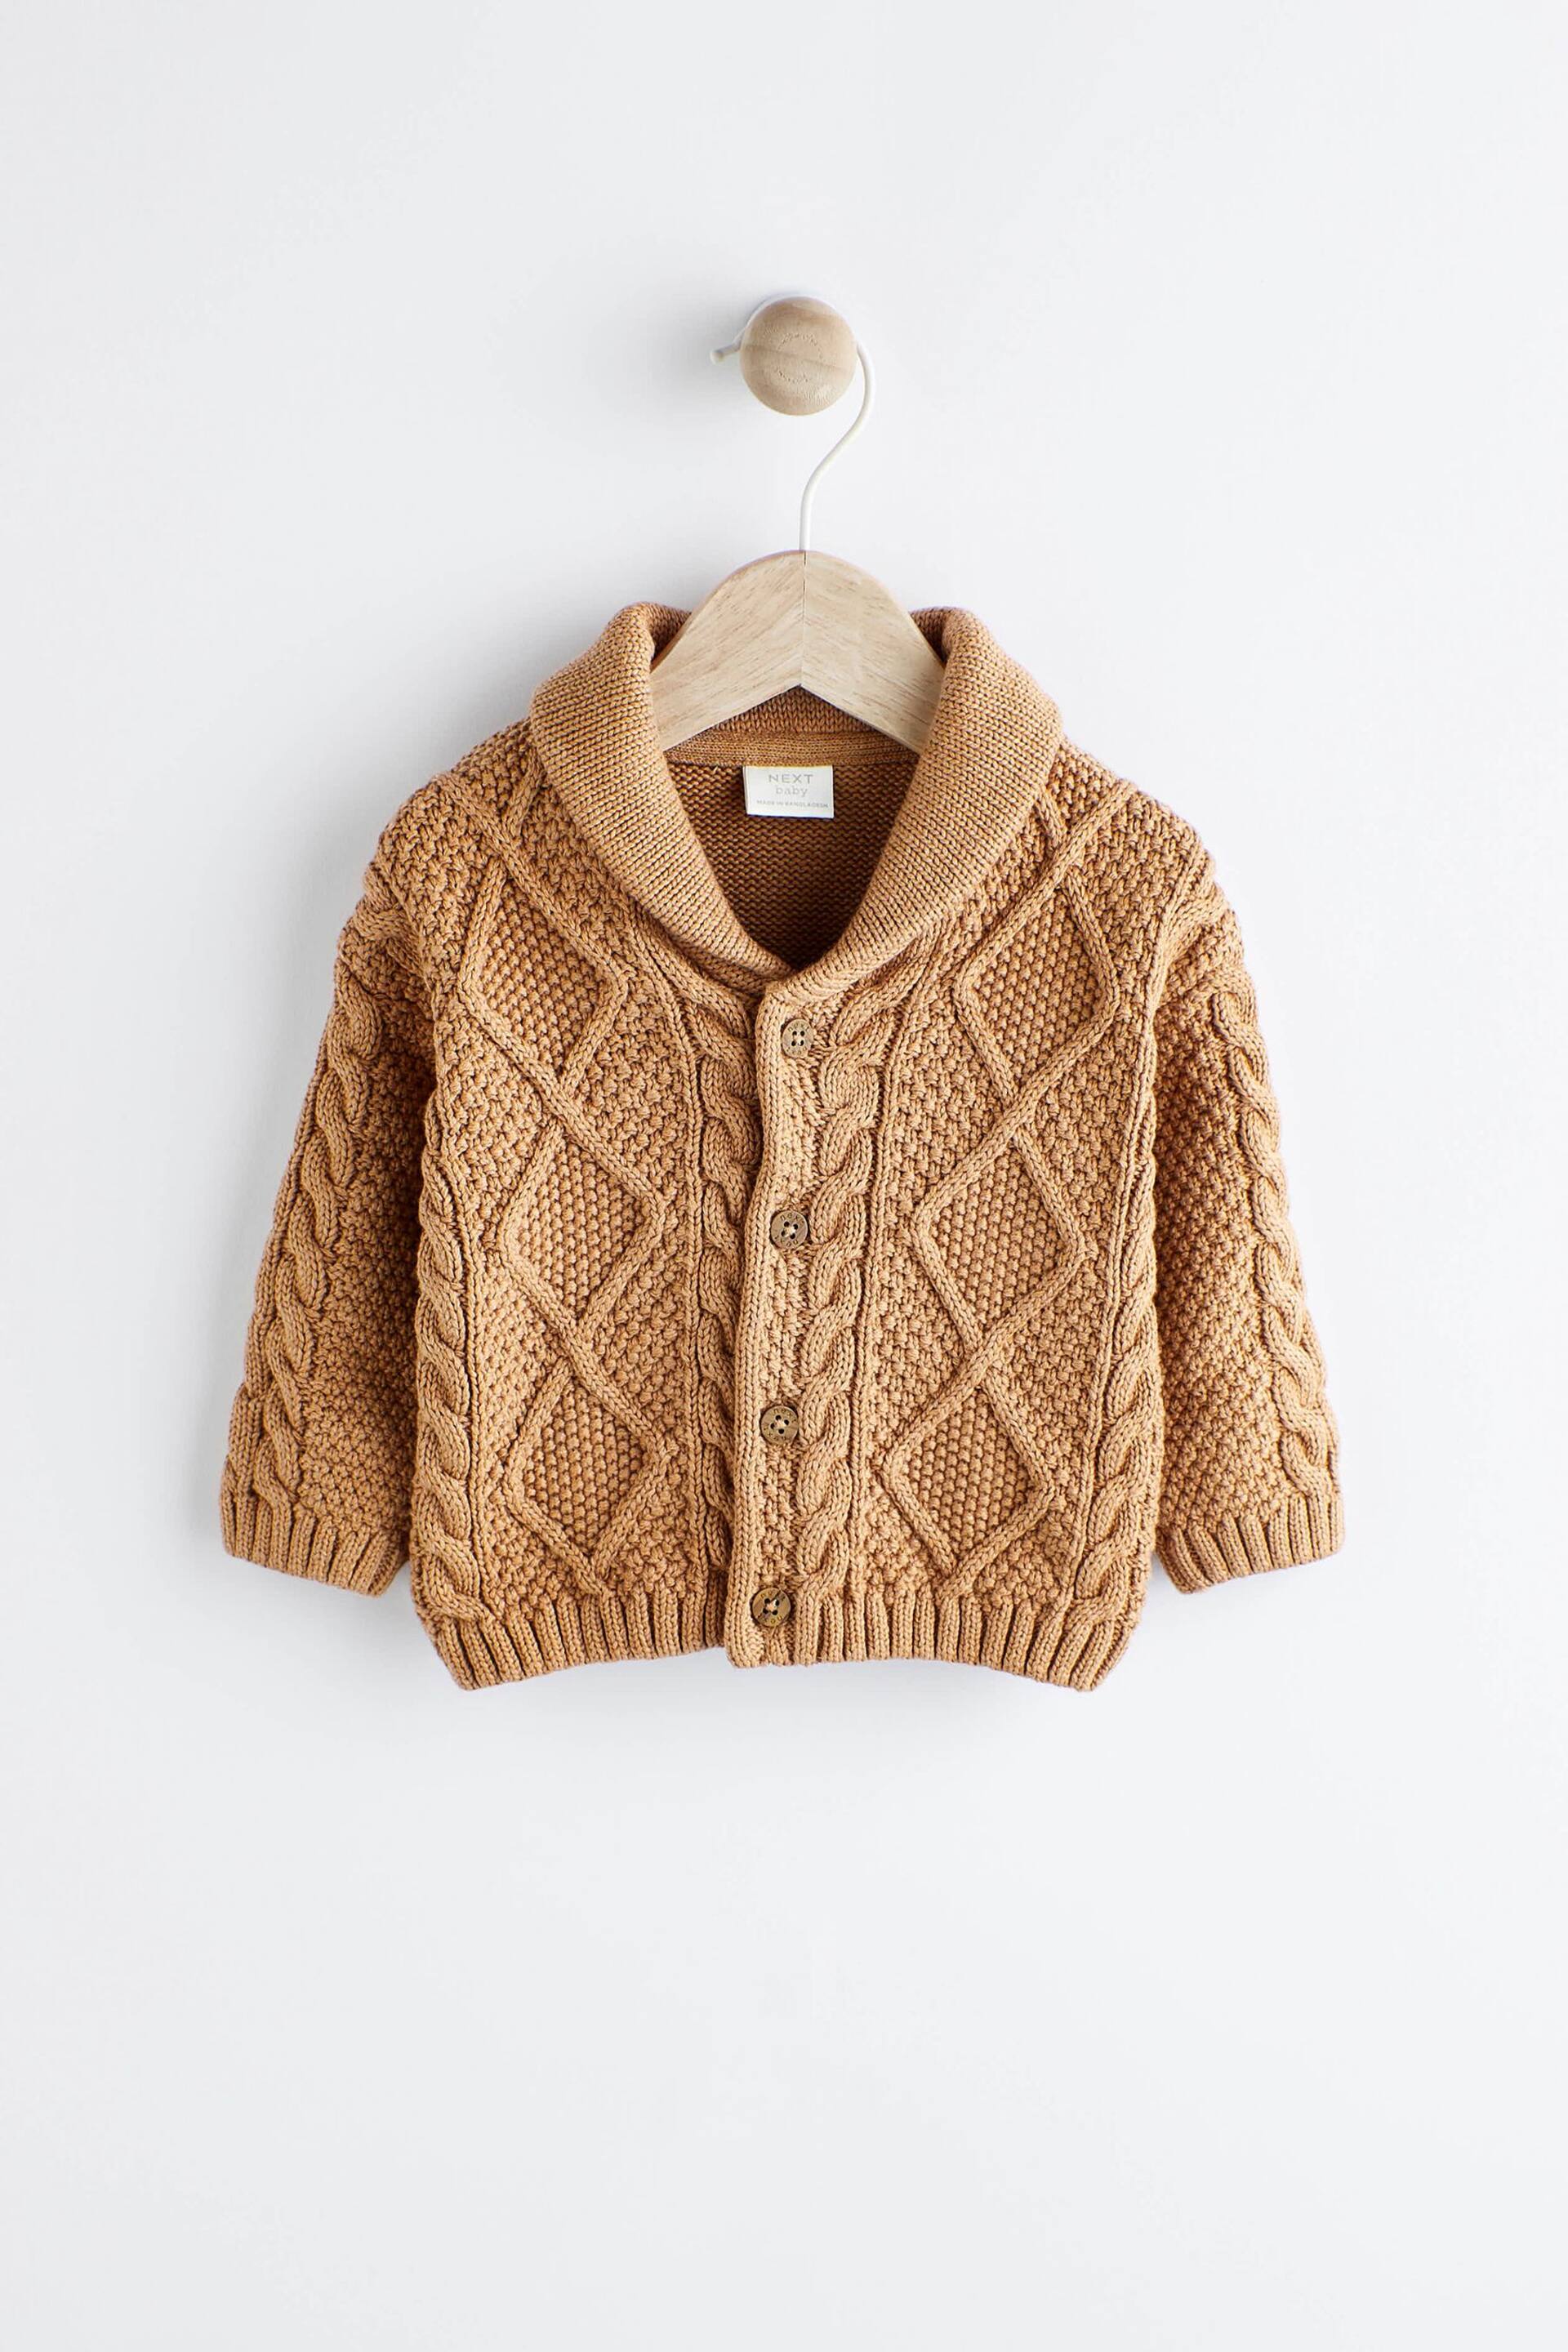 Tan Brown Cable Knitted Baby Cardigan (0mths-2yrs) - Image 1 of 7